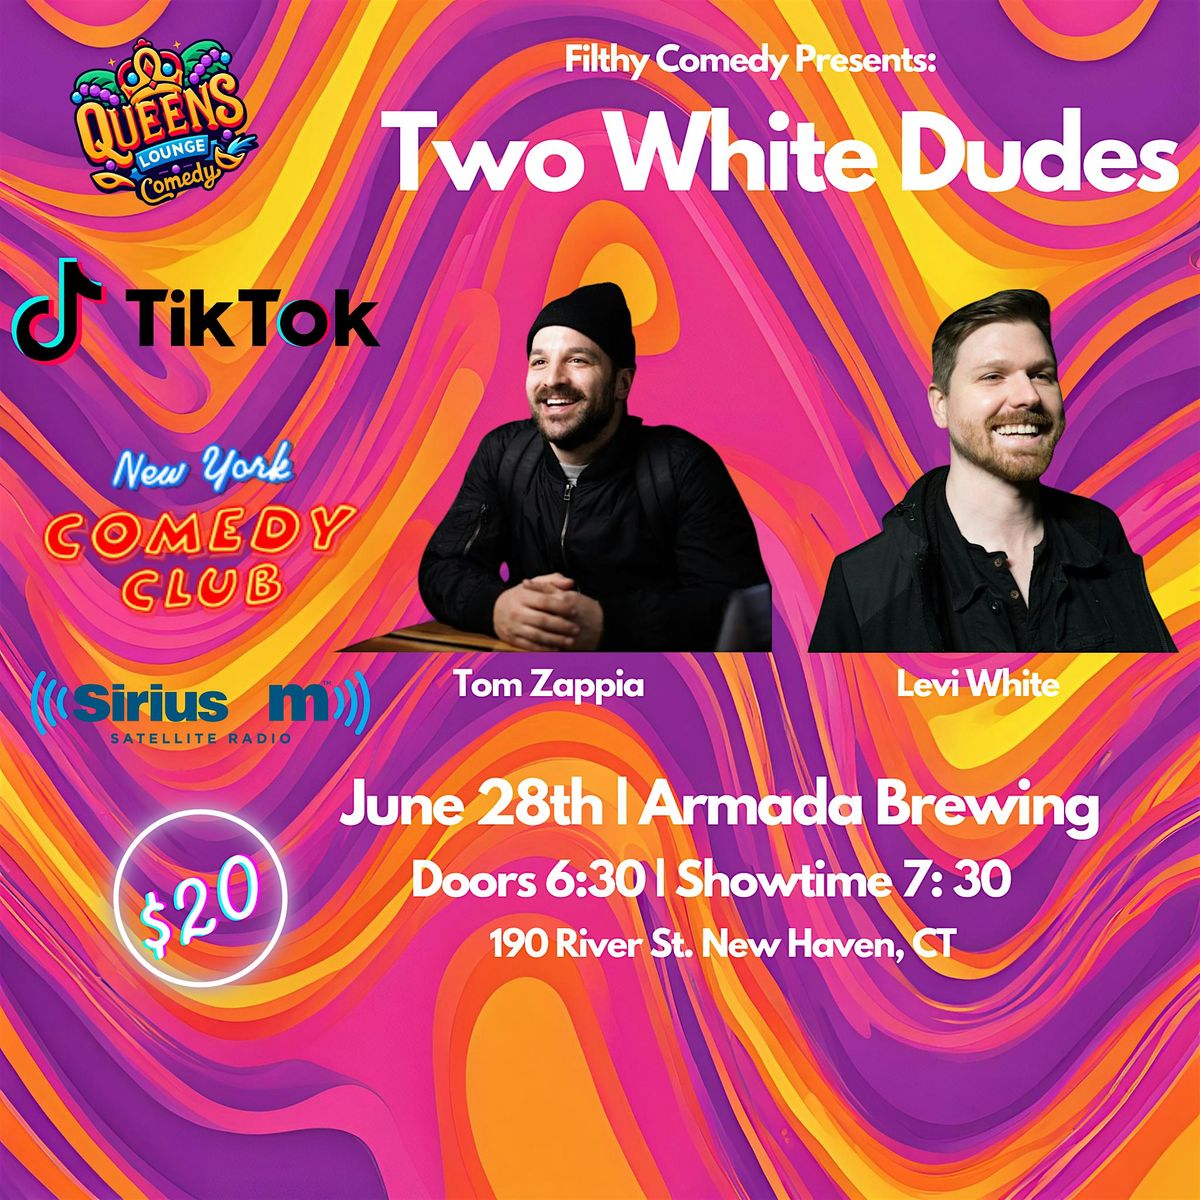 Live Standup Comedy at Armada Brewing Featuring Two White Dudes!